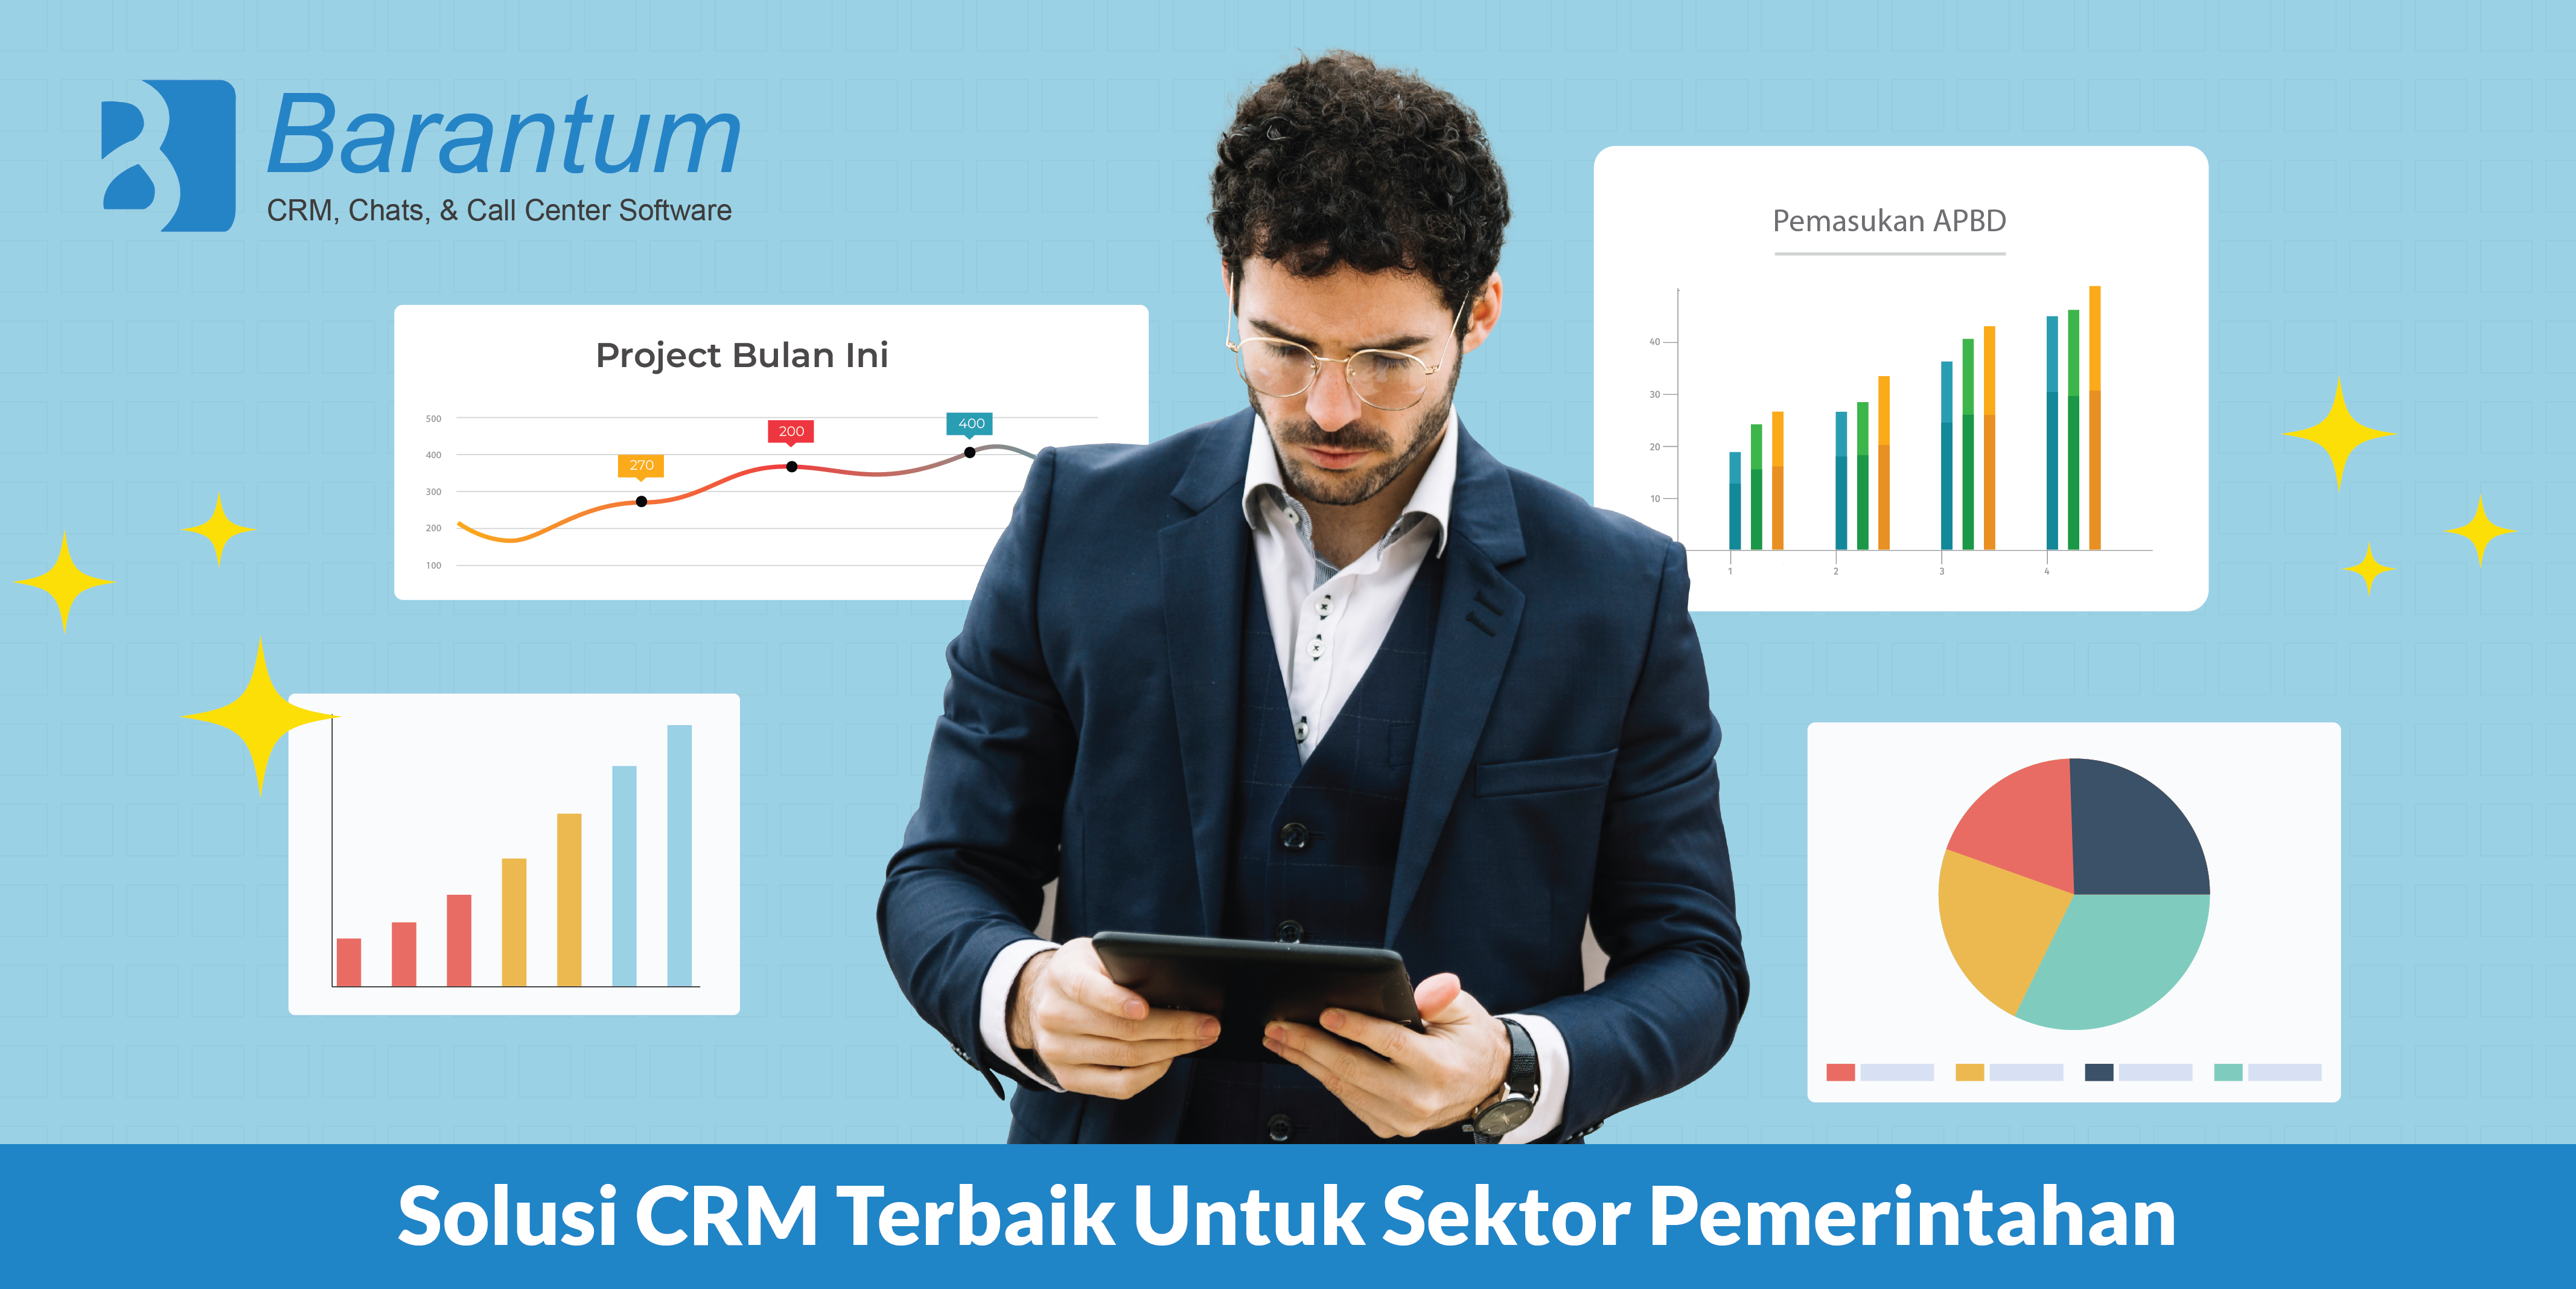 Government CRM